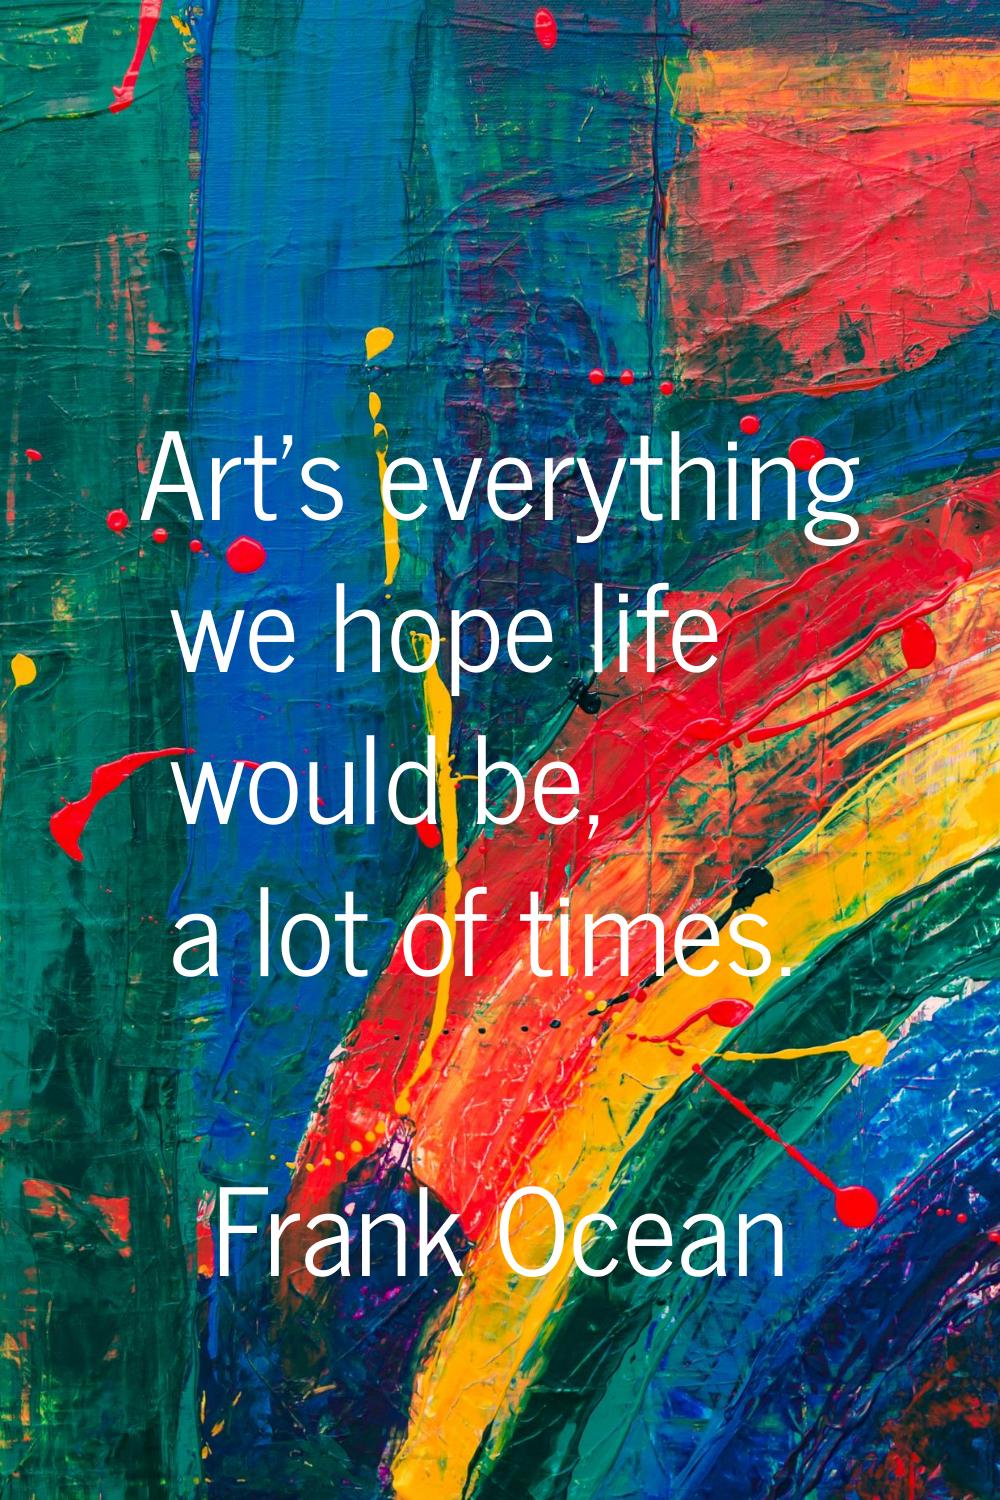 Art's everything we hope life would be, a lot of times.